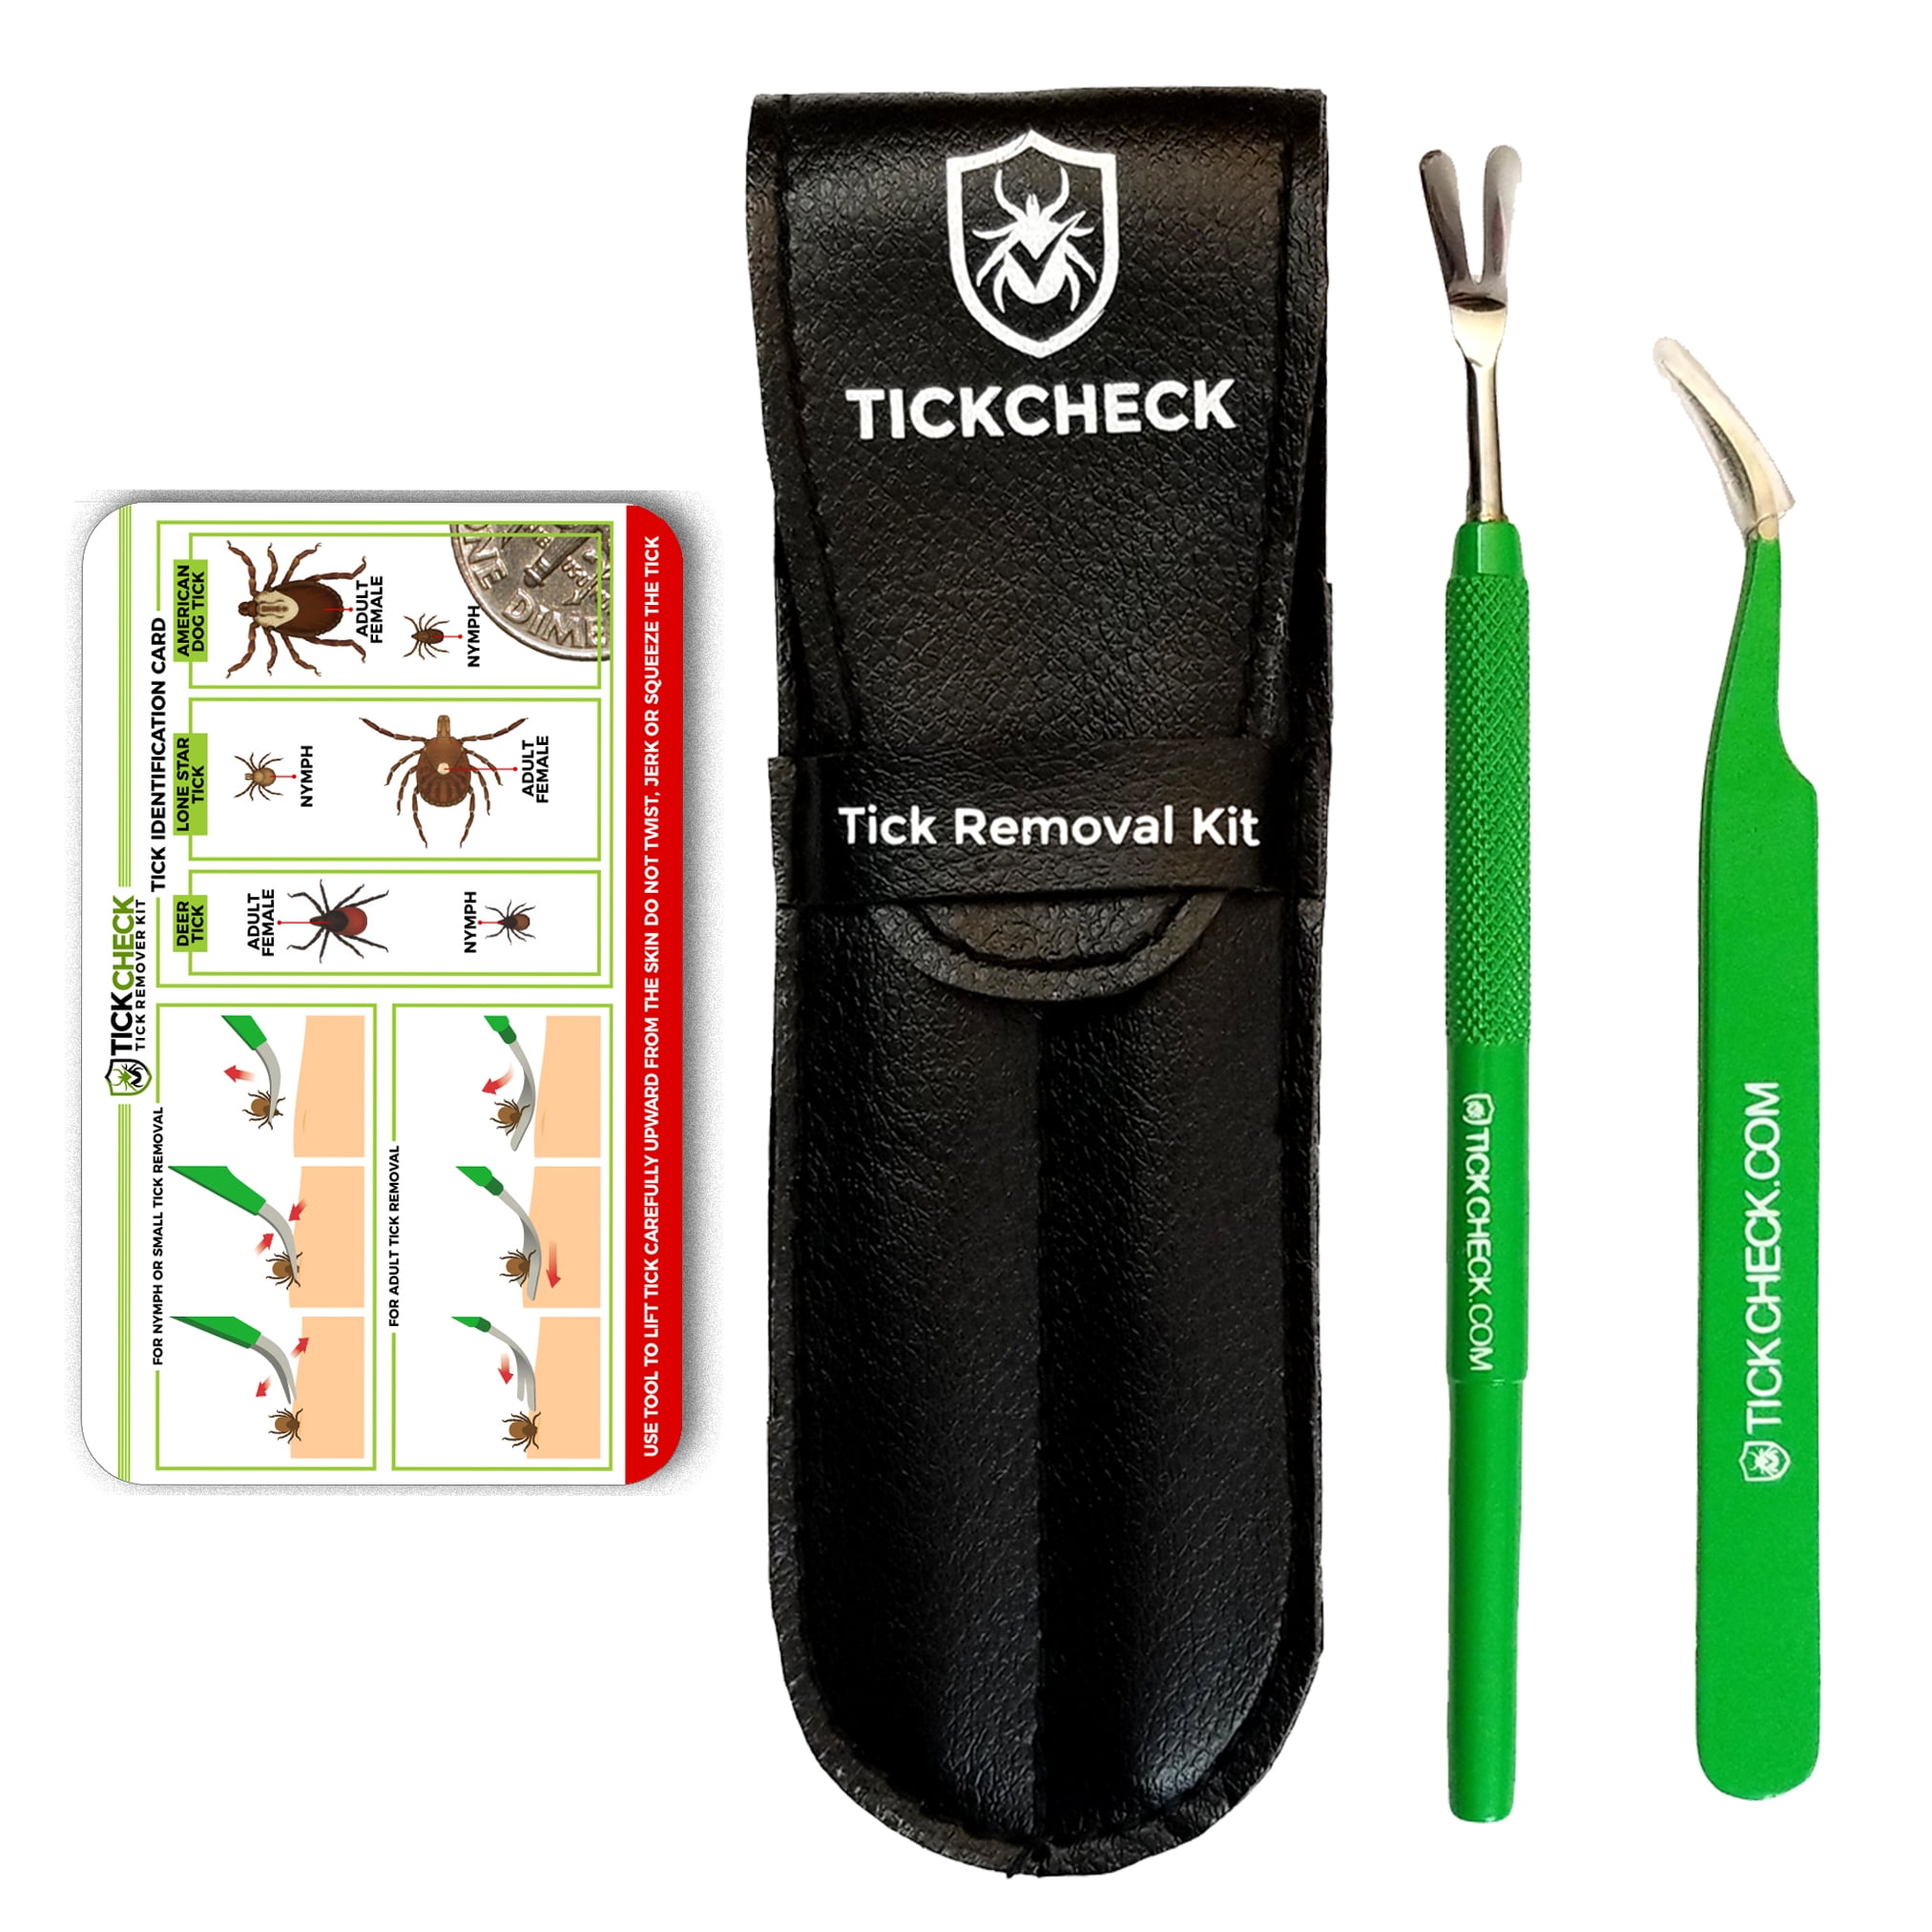 Hygienic All Stainless Steel Tick Removal Tool with Leather Case eTradewinds Tick Remover Tool Tick-Off Pro 